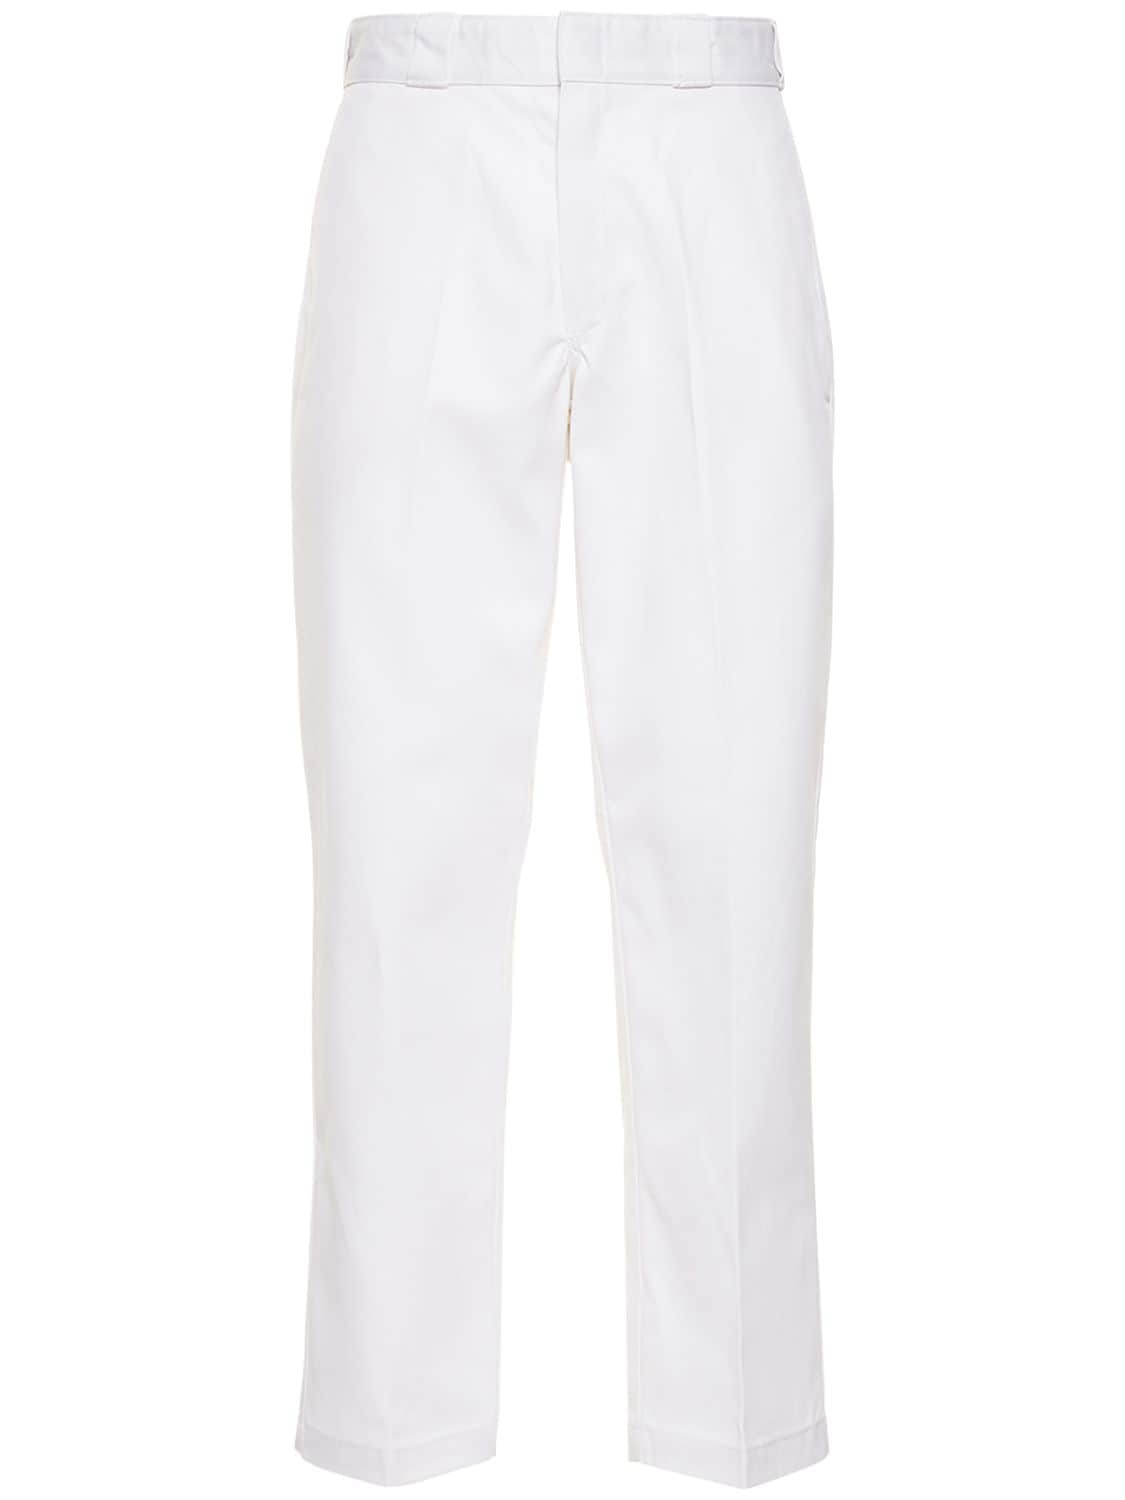 Dickies 874 Work Pants In White Straight Fit - White | ModeSens